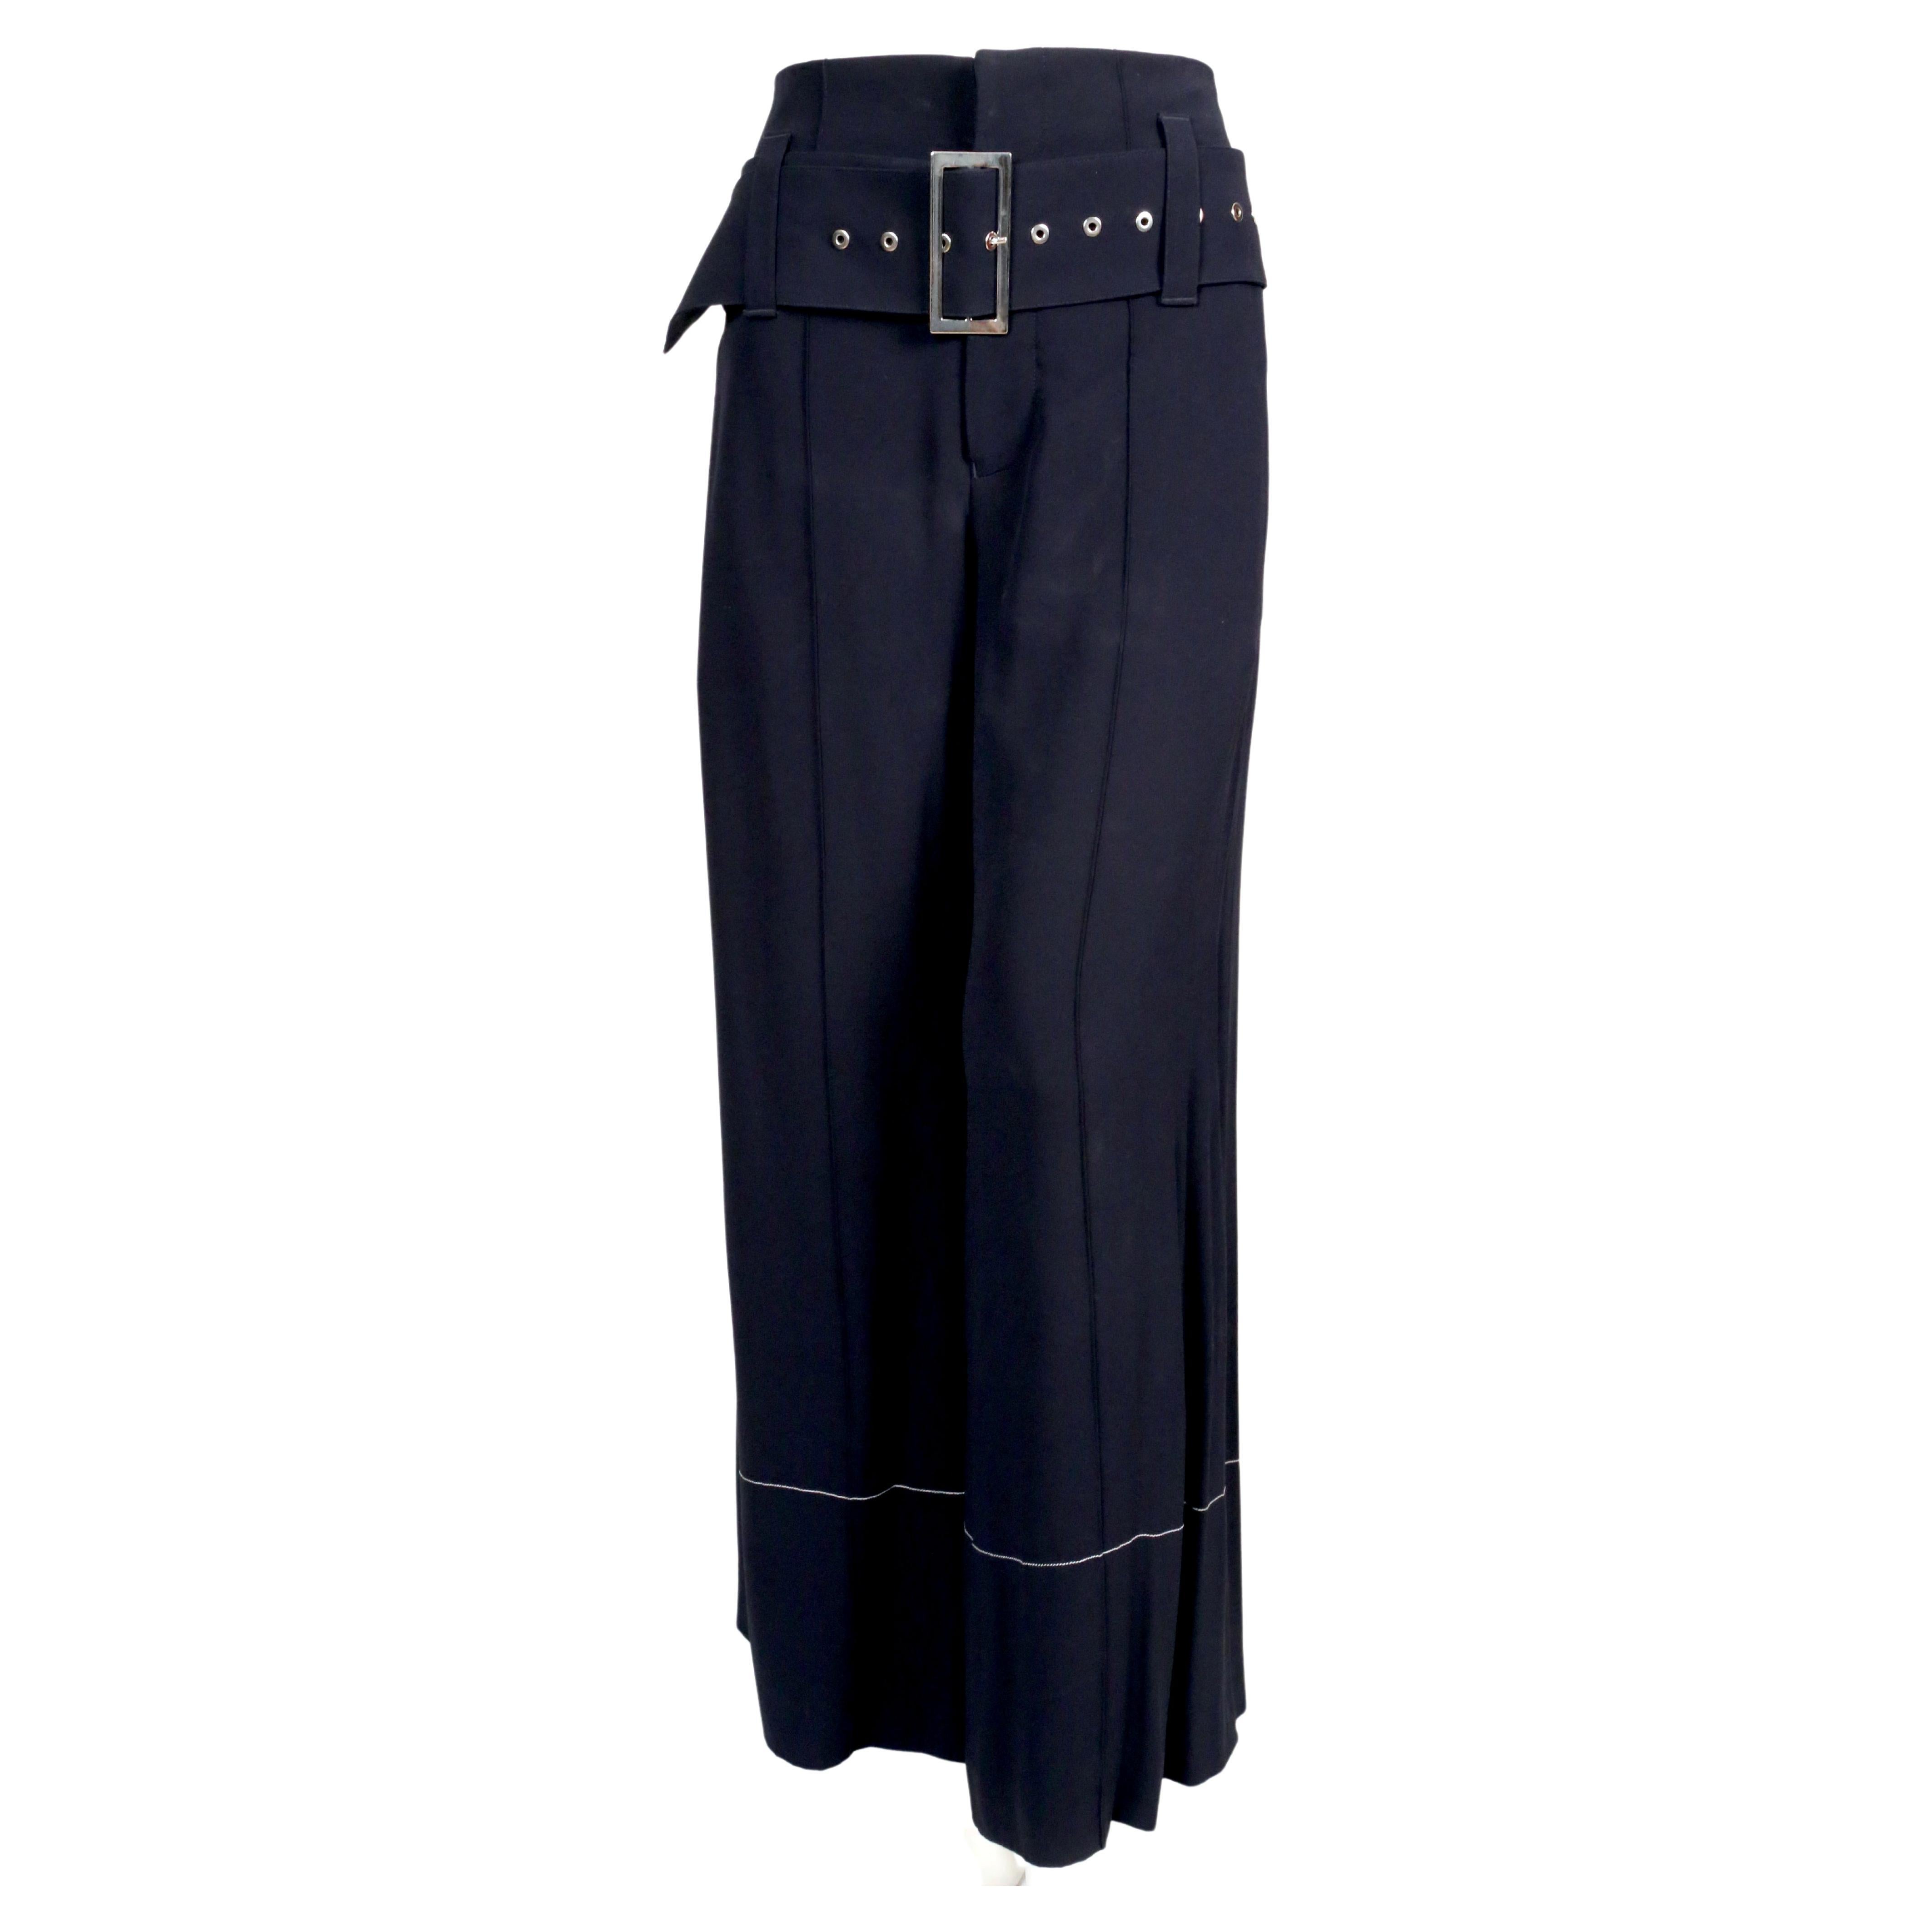 CELINE by PHOEBE PHILO navy blue pants with wide belt and contrast topstitching